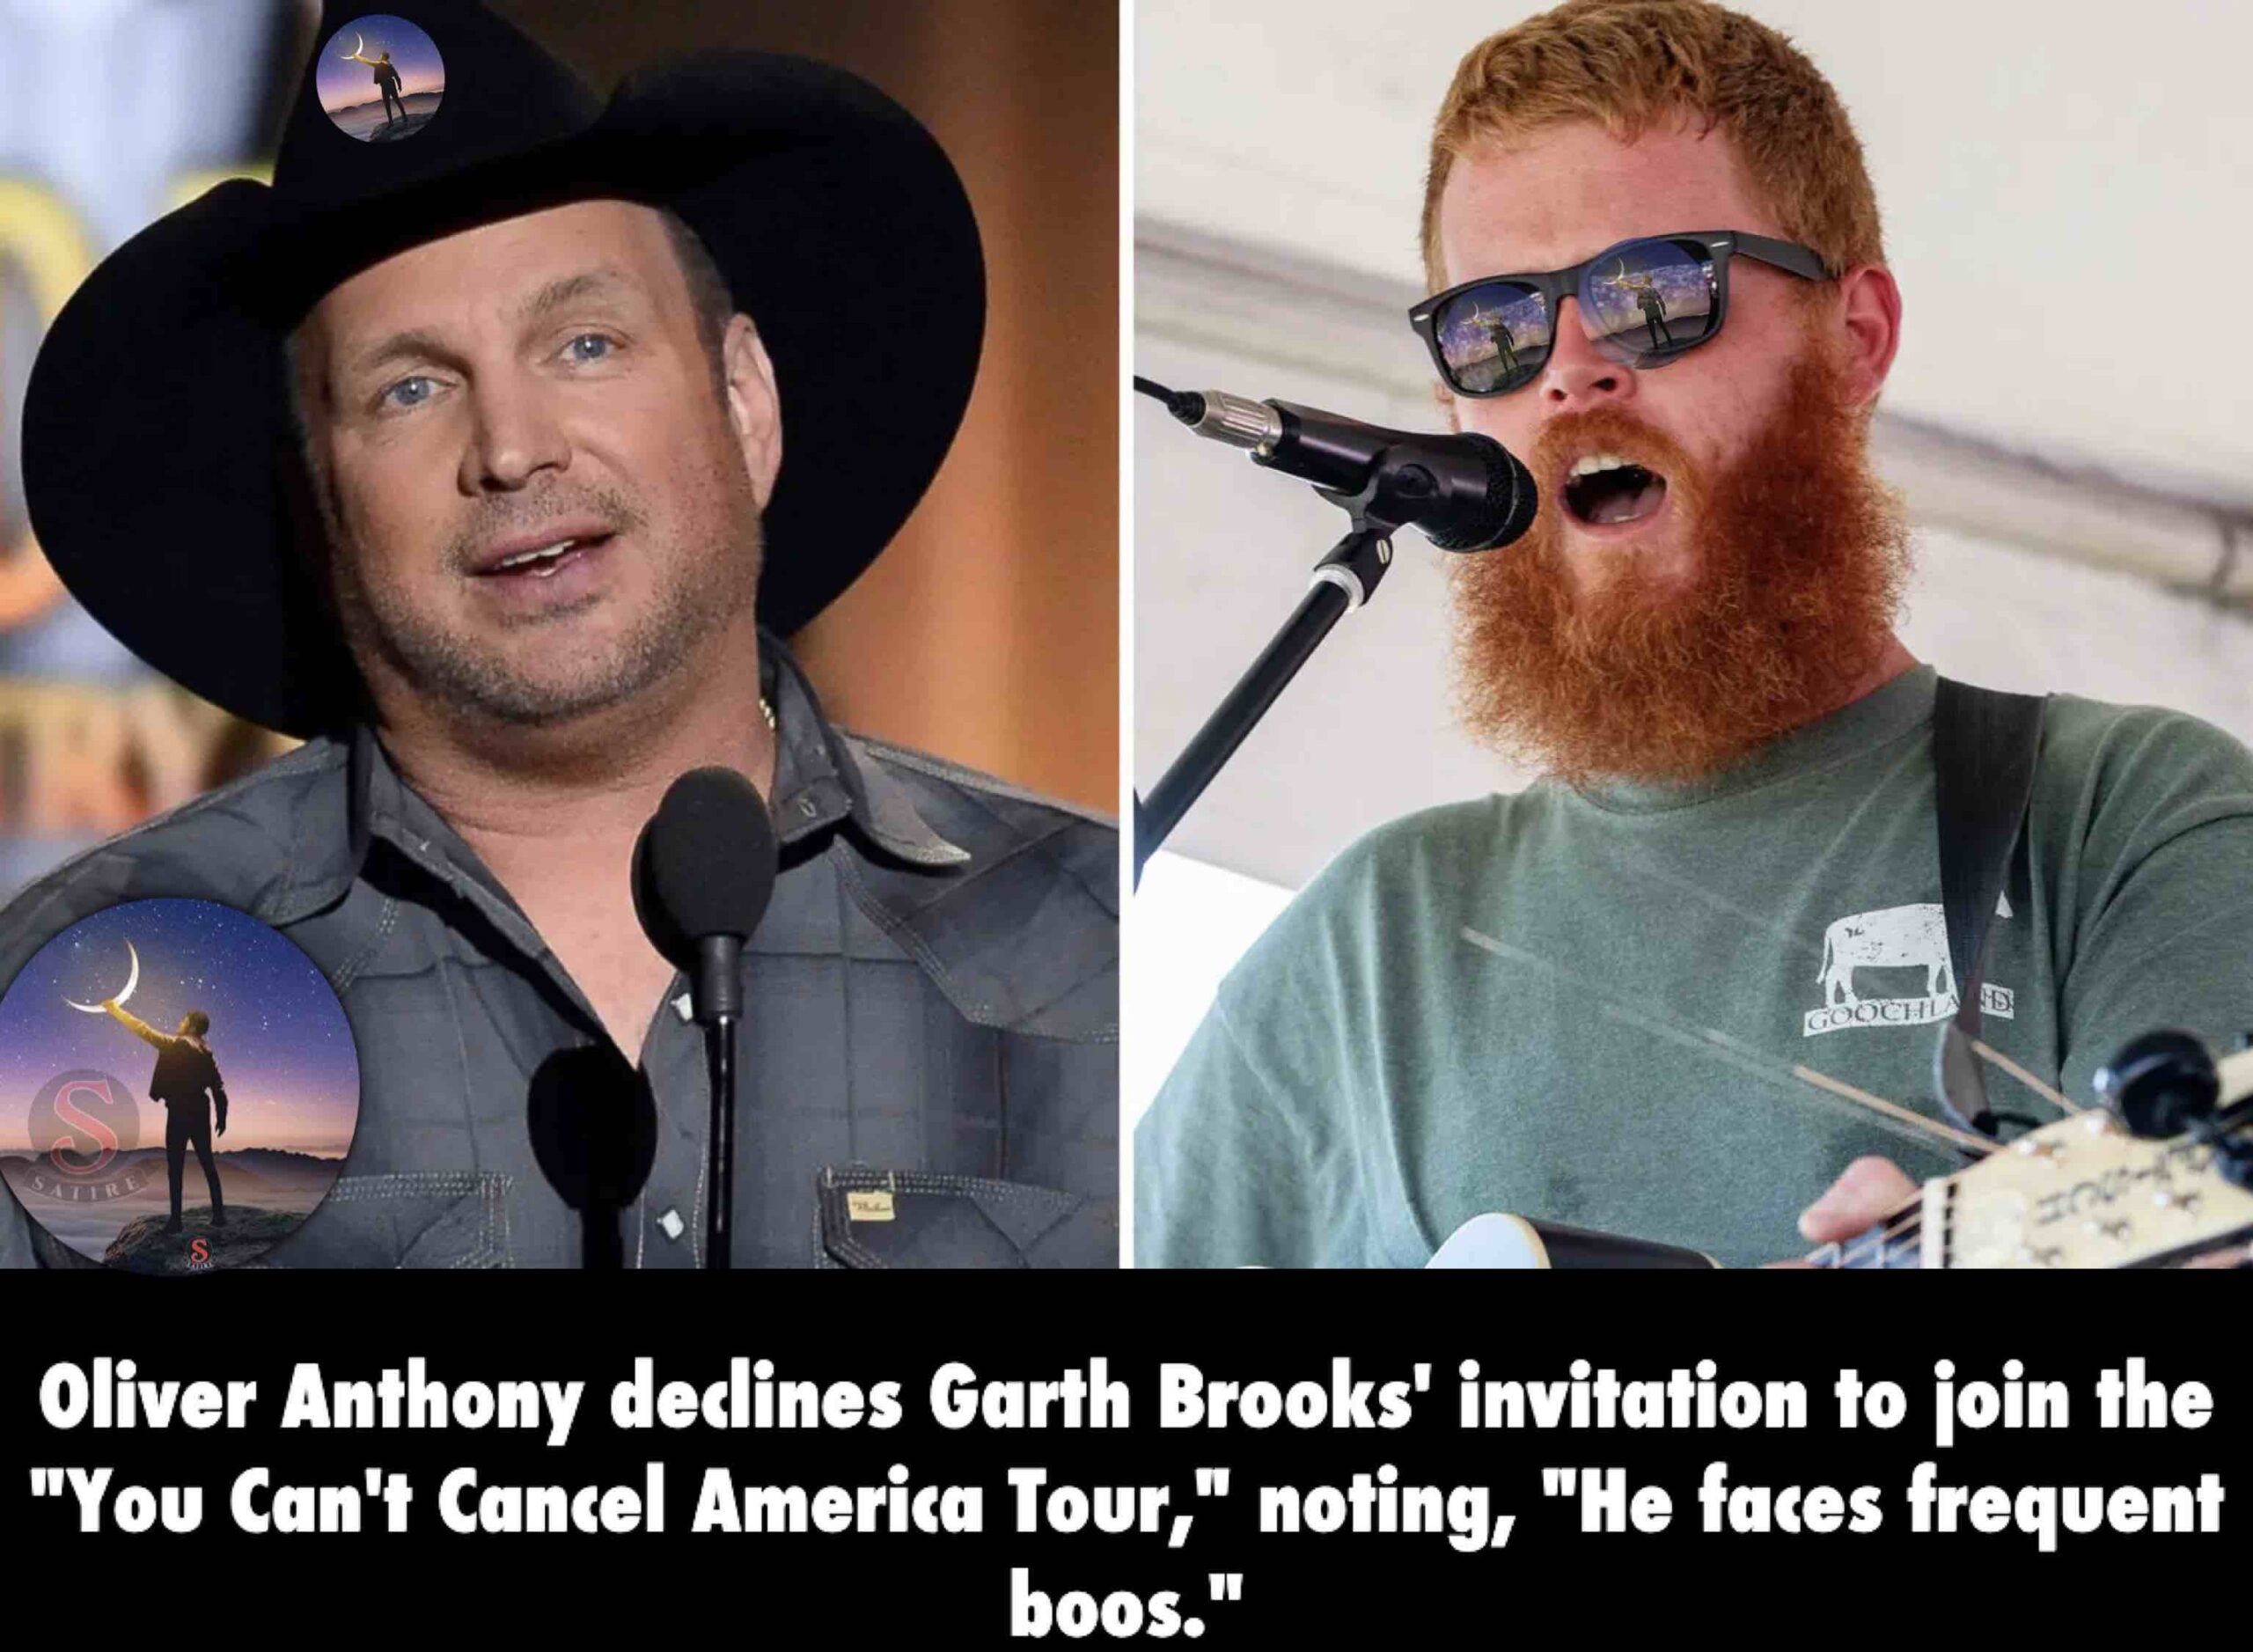 Oliver Anthony declines Garth Brooks' invitation to join the "You Can't